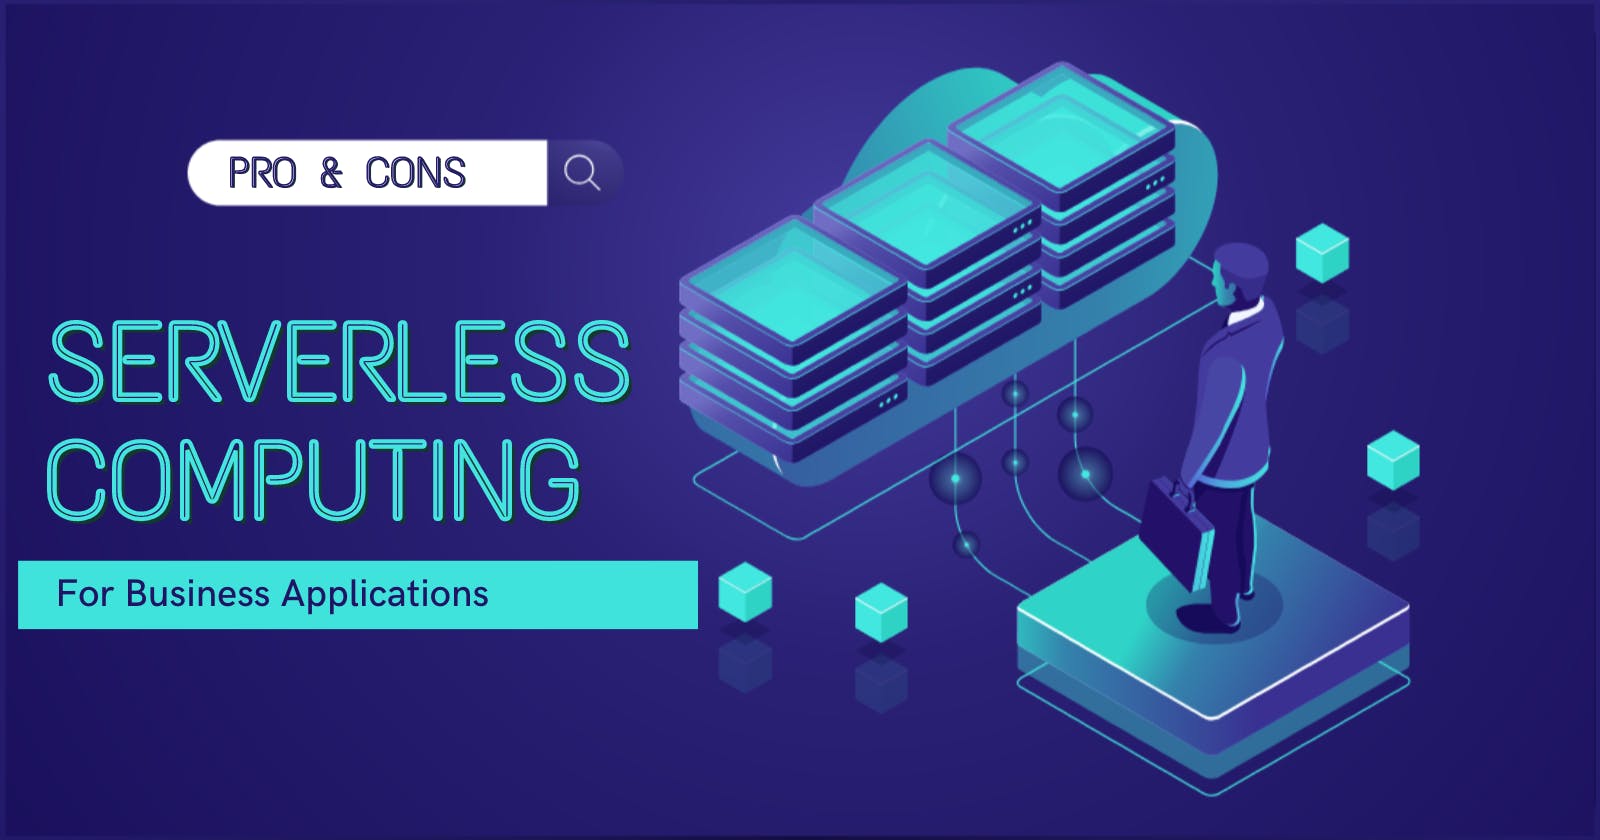 The Pros and Cons of Serverless Computing for Business Applications